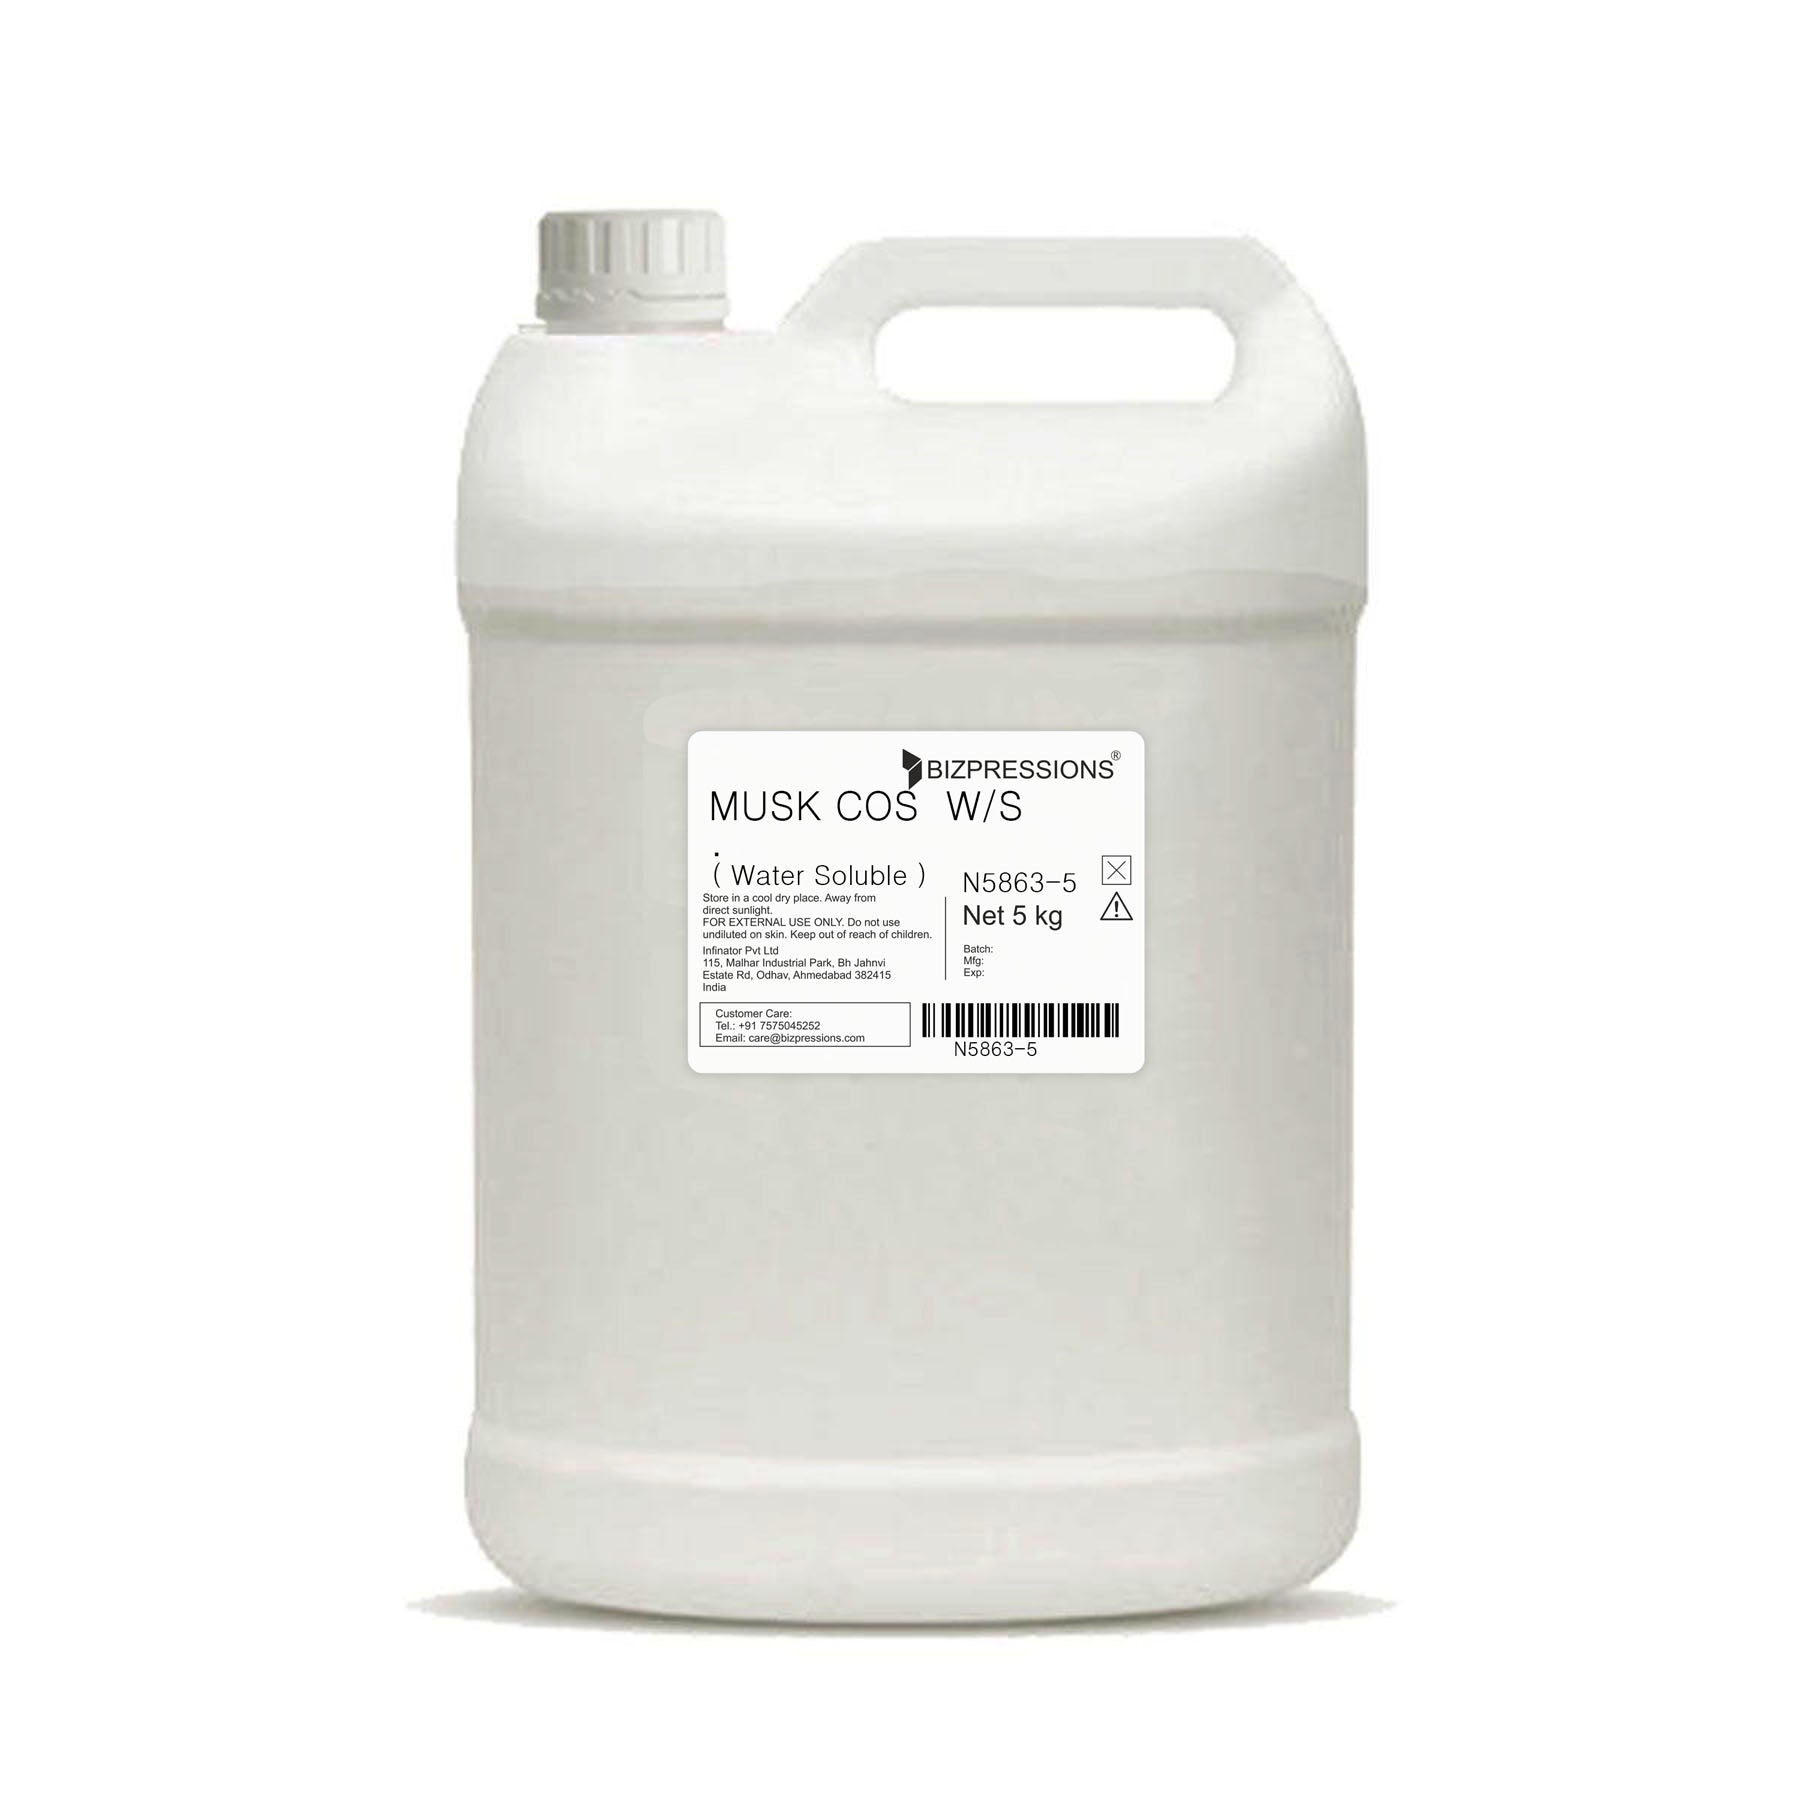 MUSK COS W/S - Fragrance ( Water Soluble ) - 5 kg